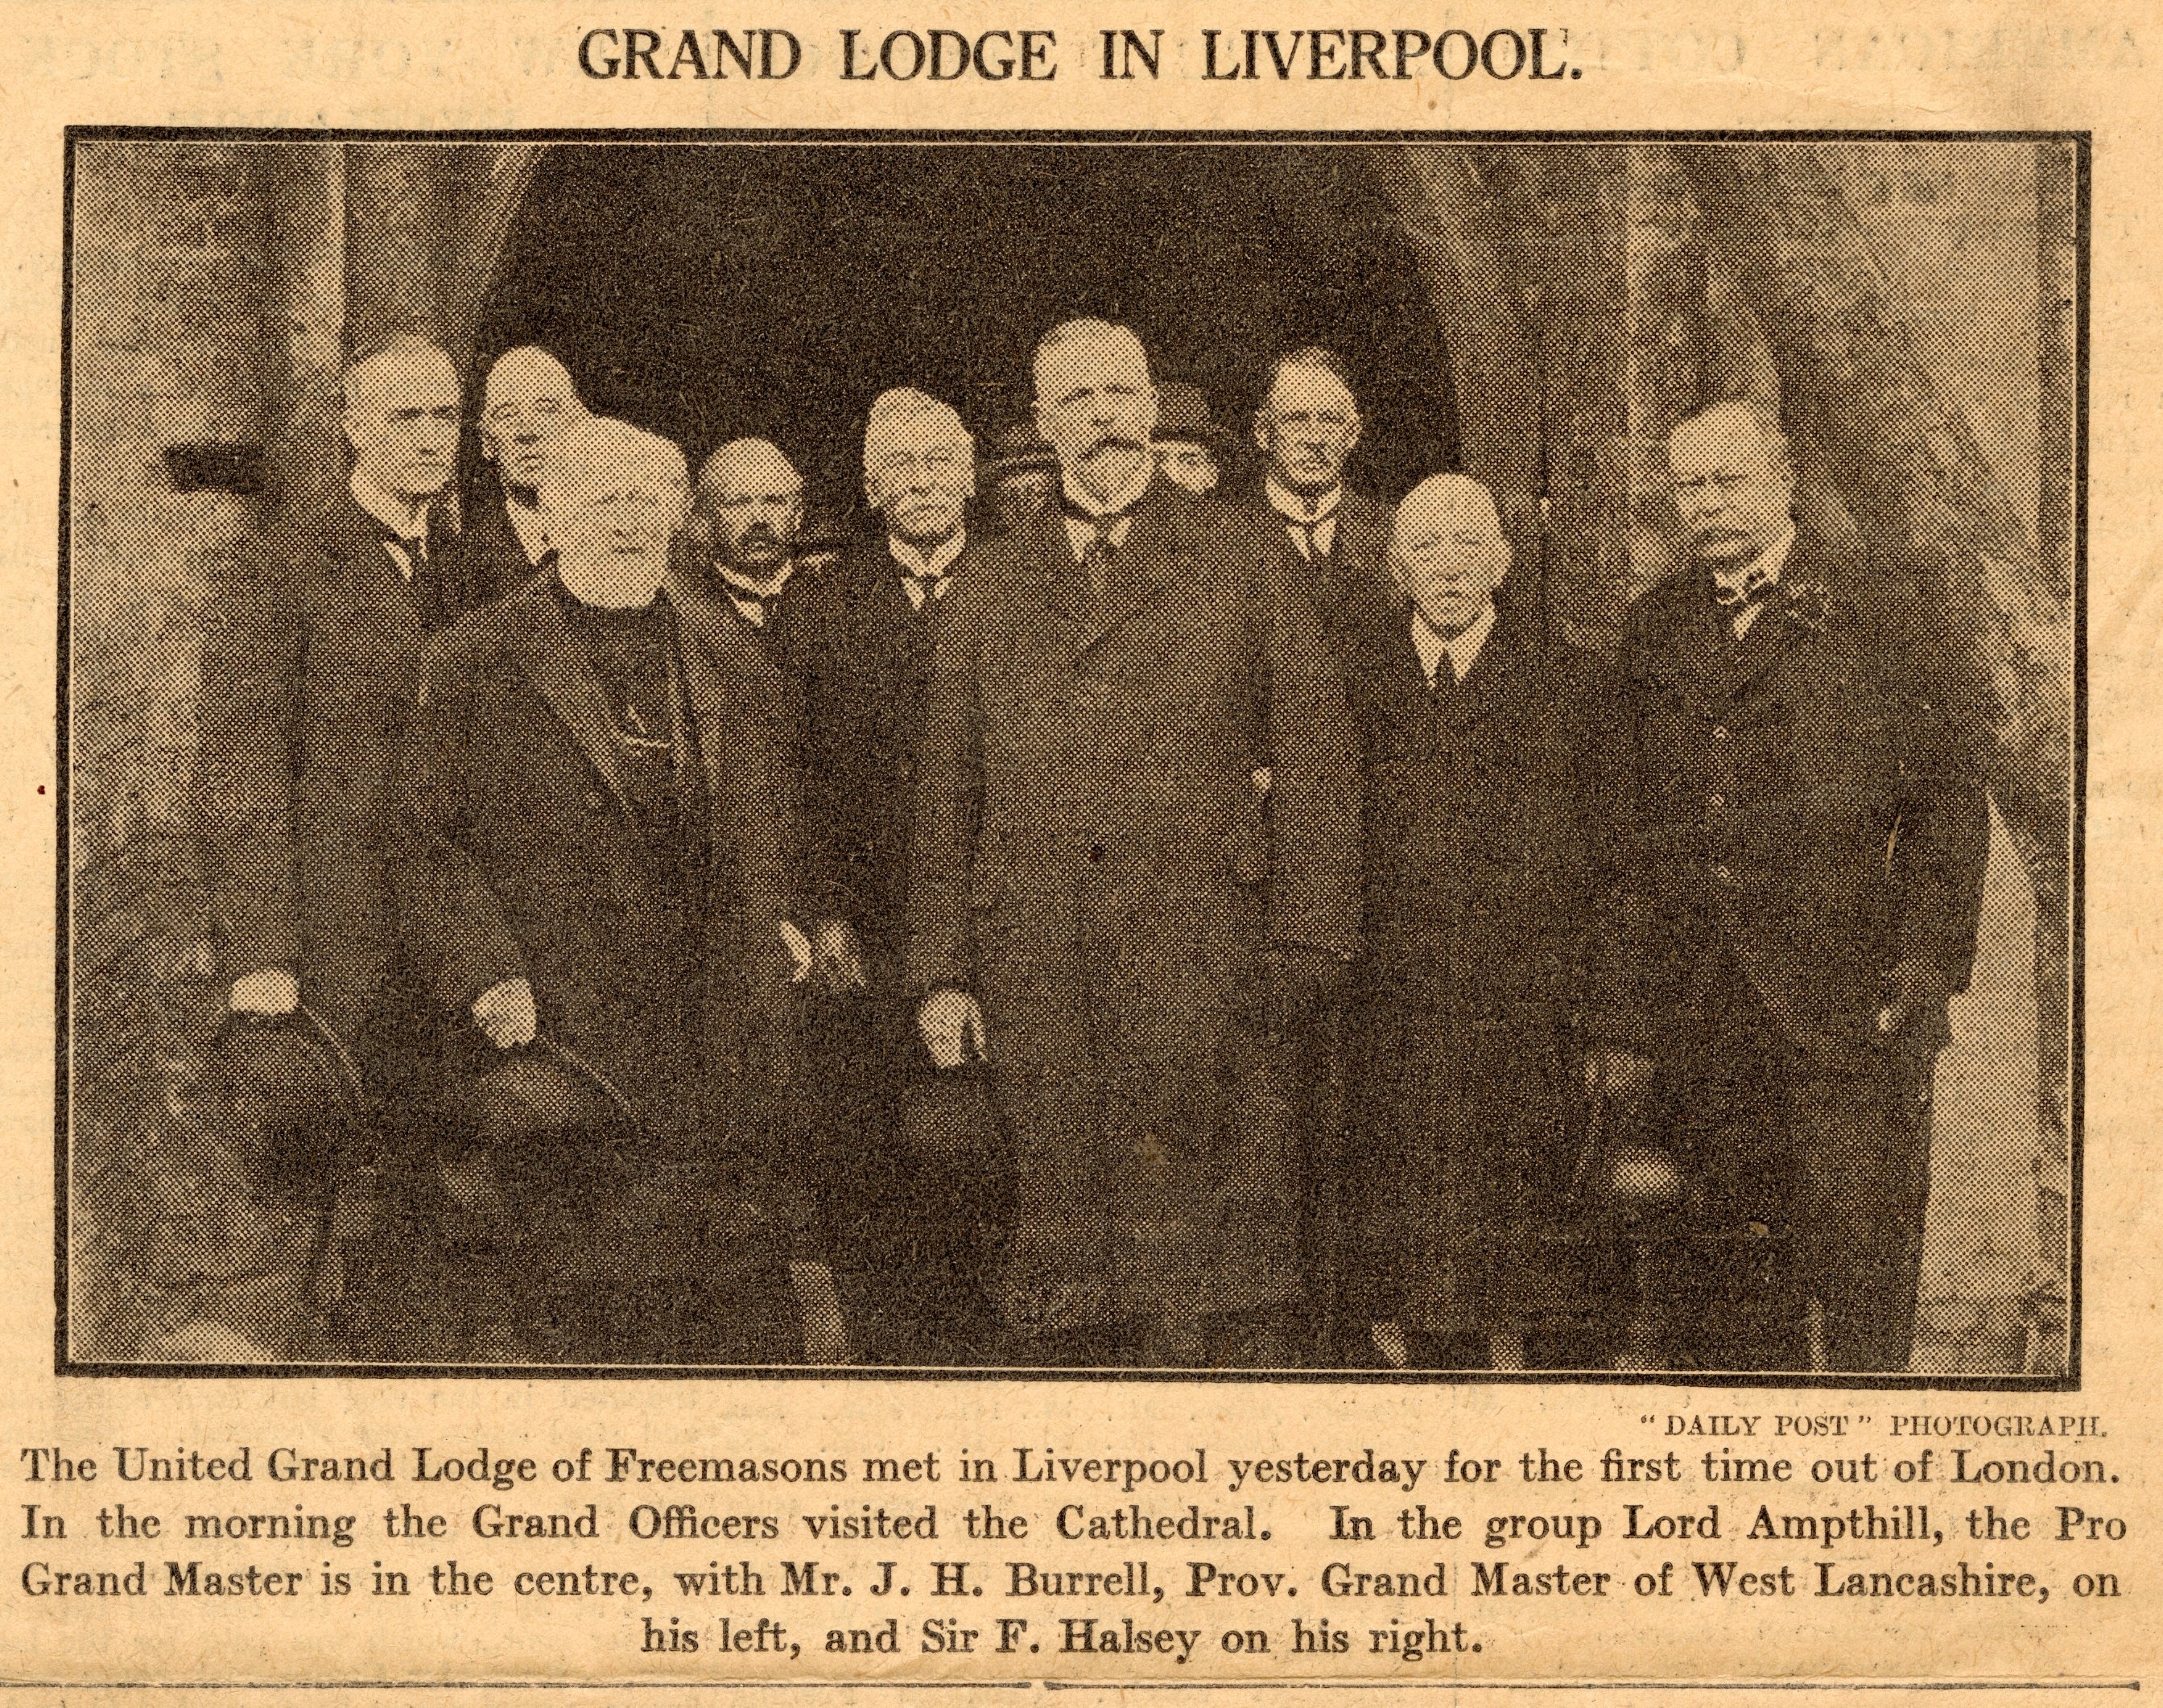 Press cutting with photo of the Grand Lodge delegation visiting the Liverpool Cathedral in 1923